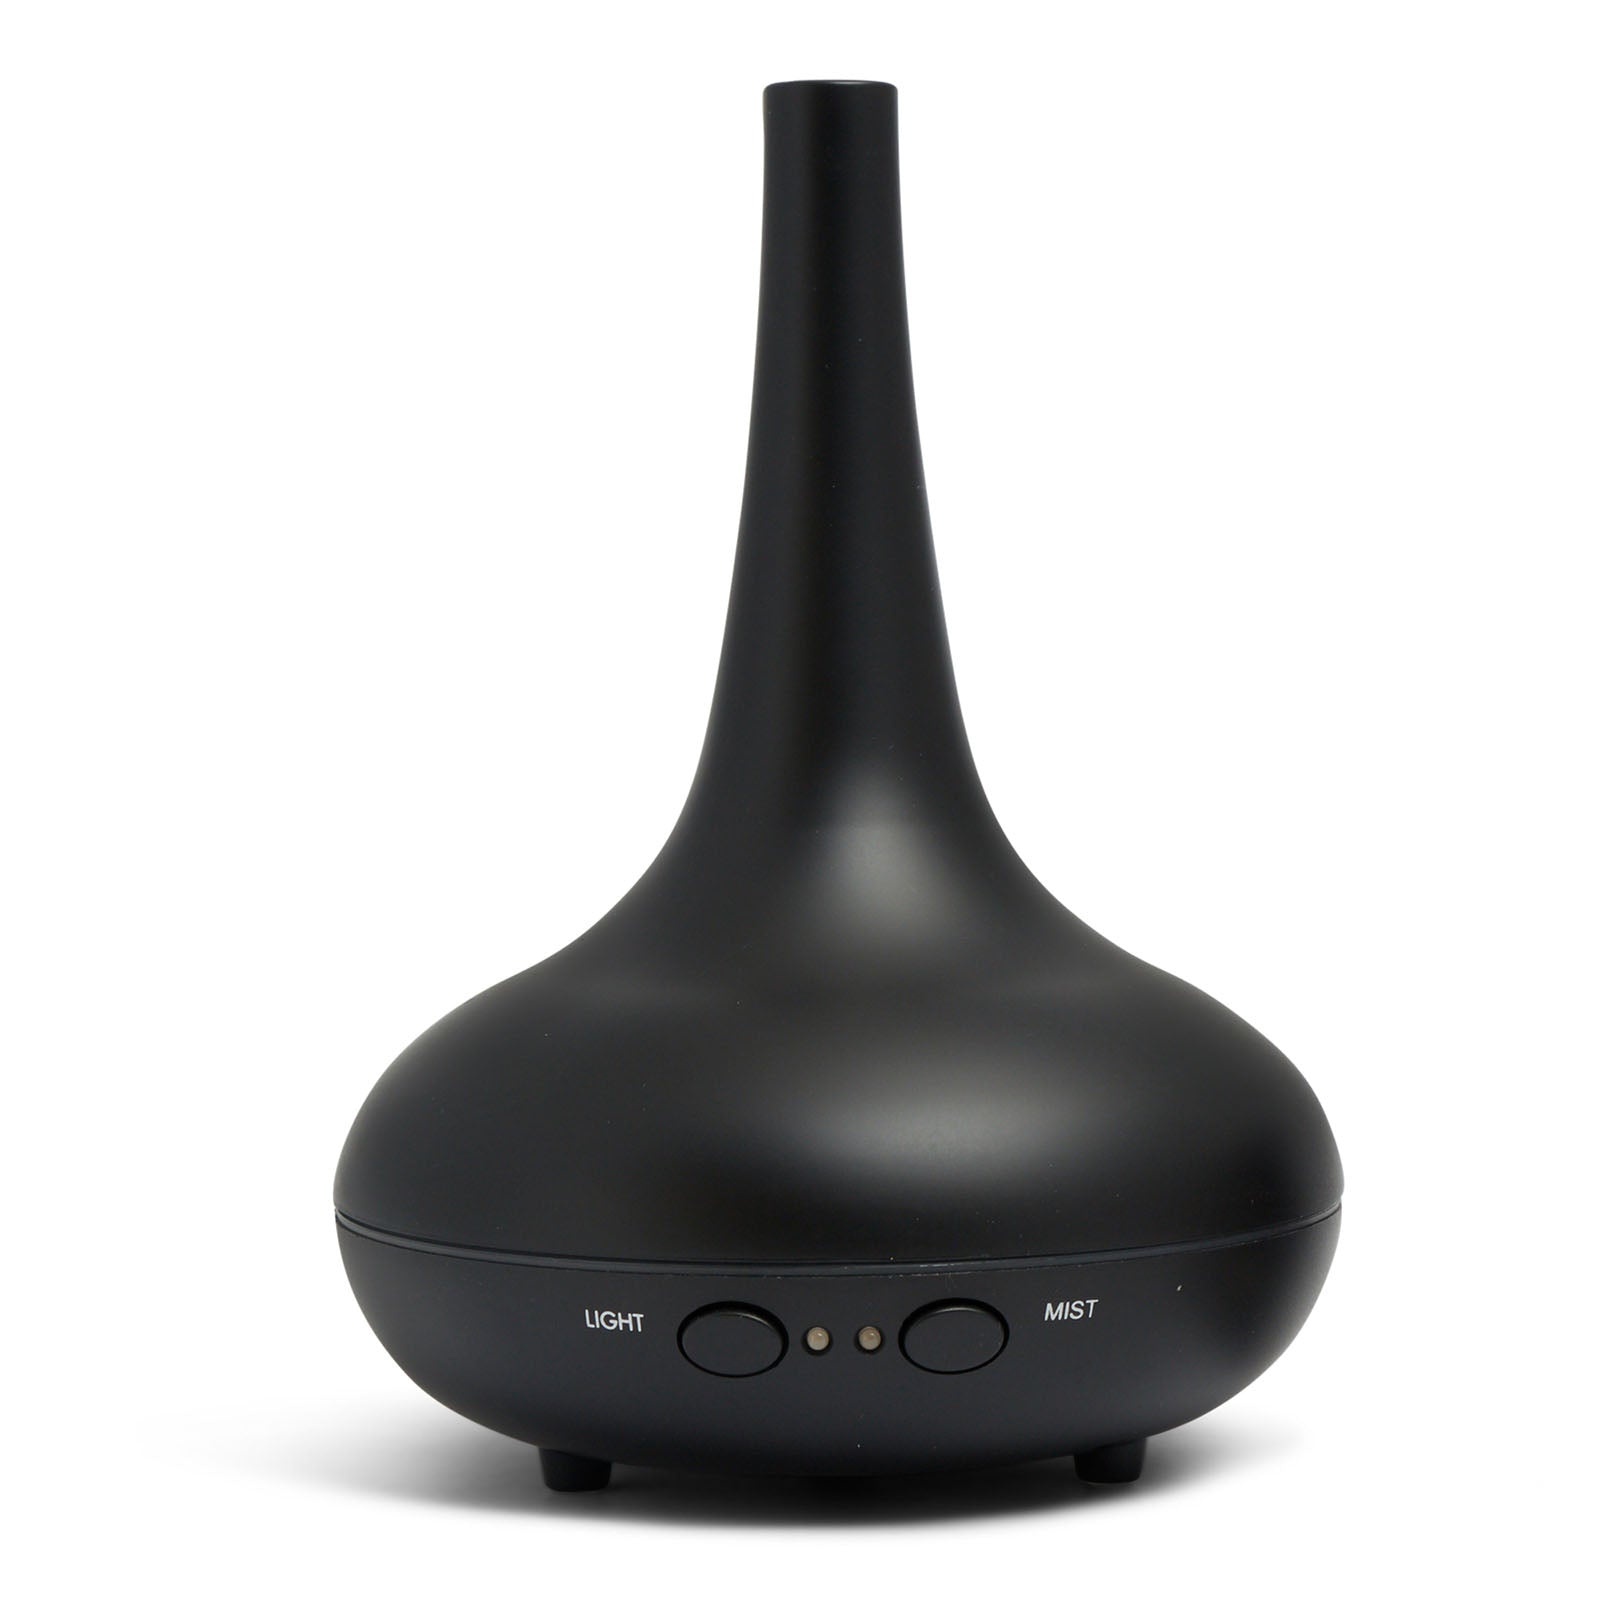 Essential Oil Diffuser Ultrasonic Humidifier Aromatherapy LED Light 200ML 3 Oils - Black - SILBERSHELL